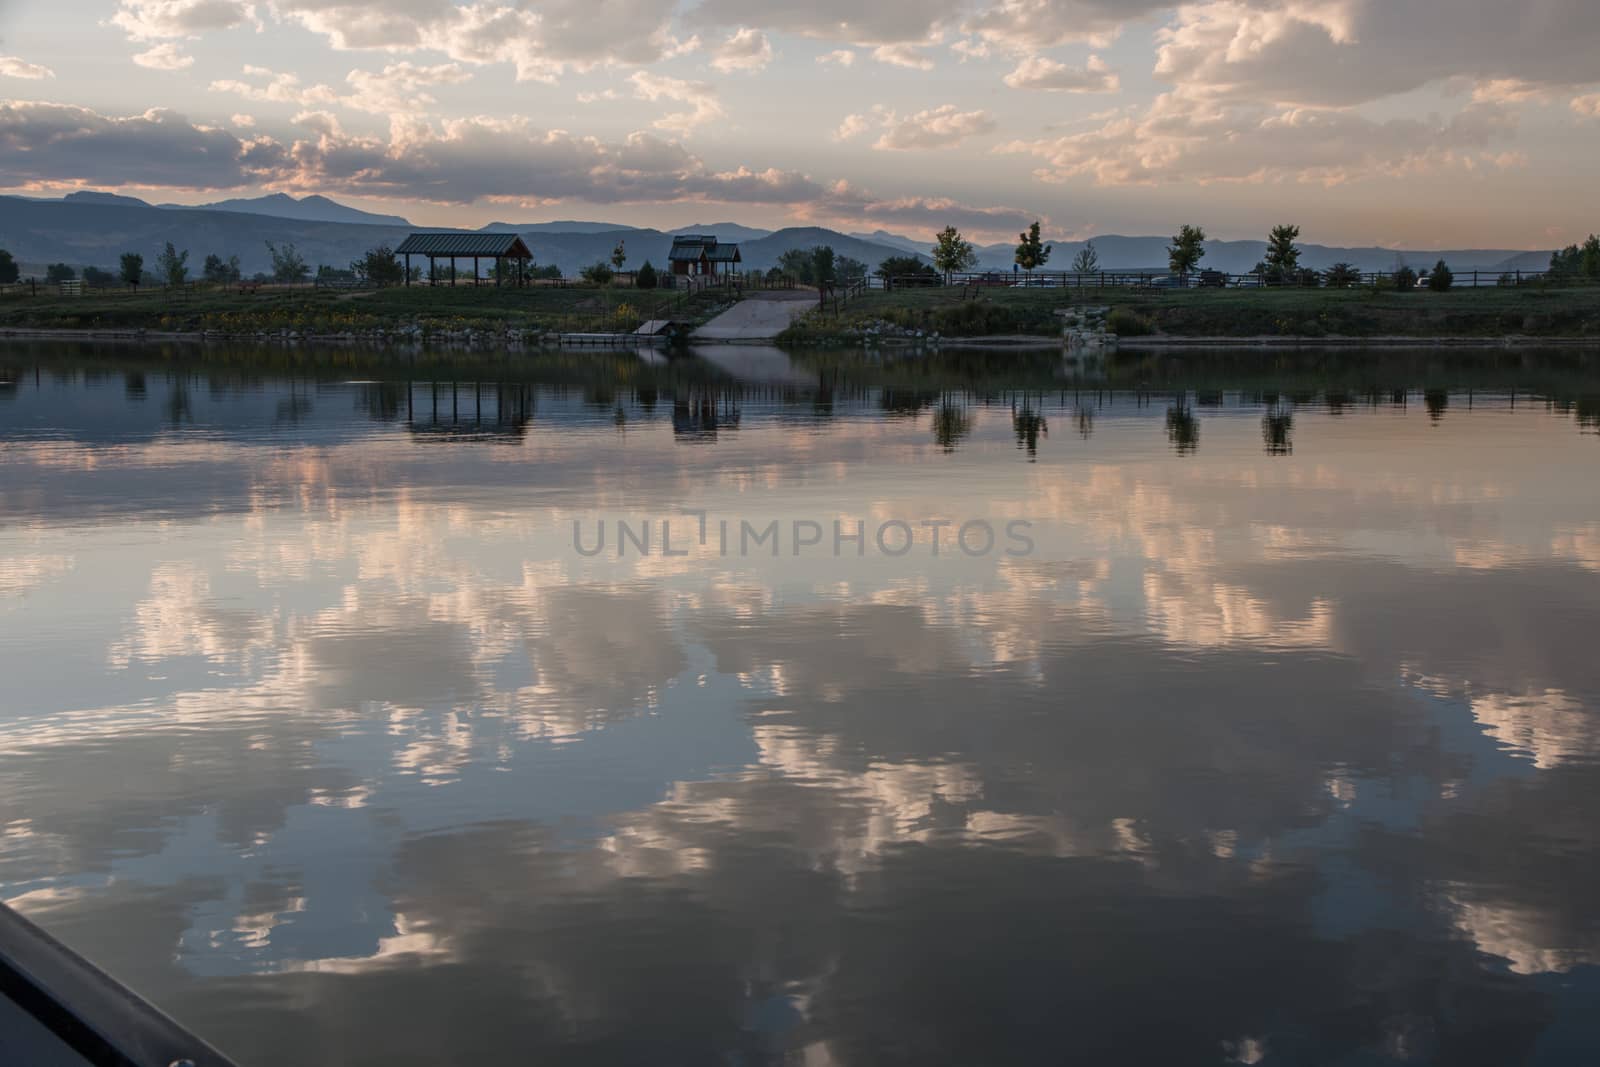 Beautiful reflection of the clouds on the water at Lagerman Reservoir in Longmont, Colorado